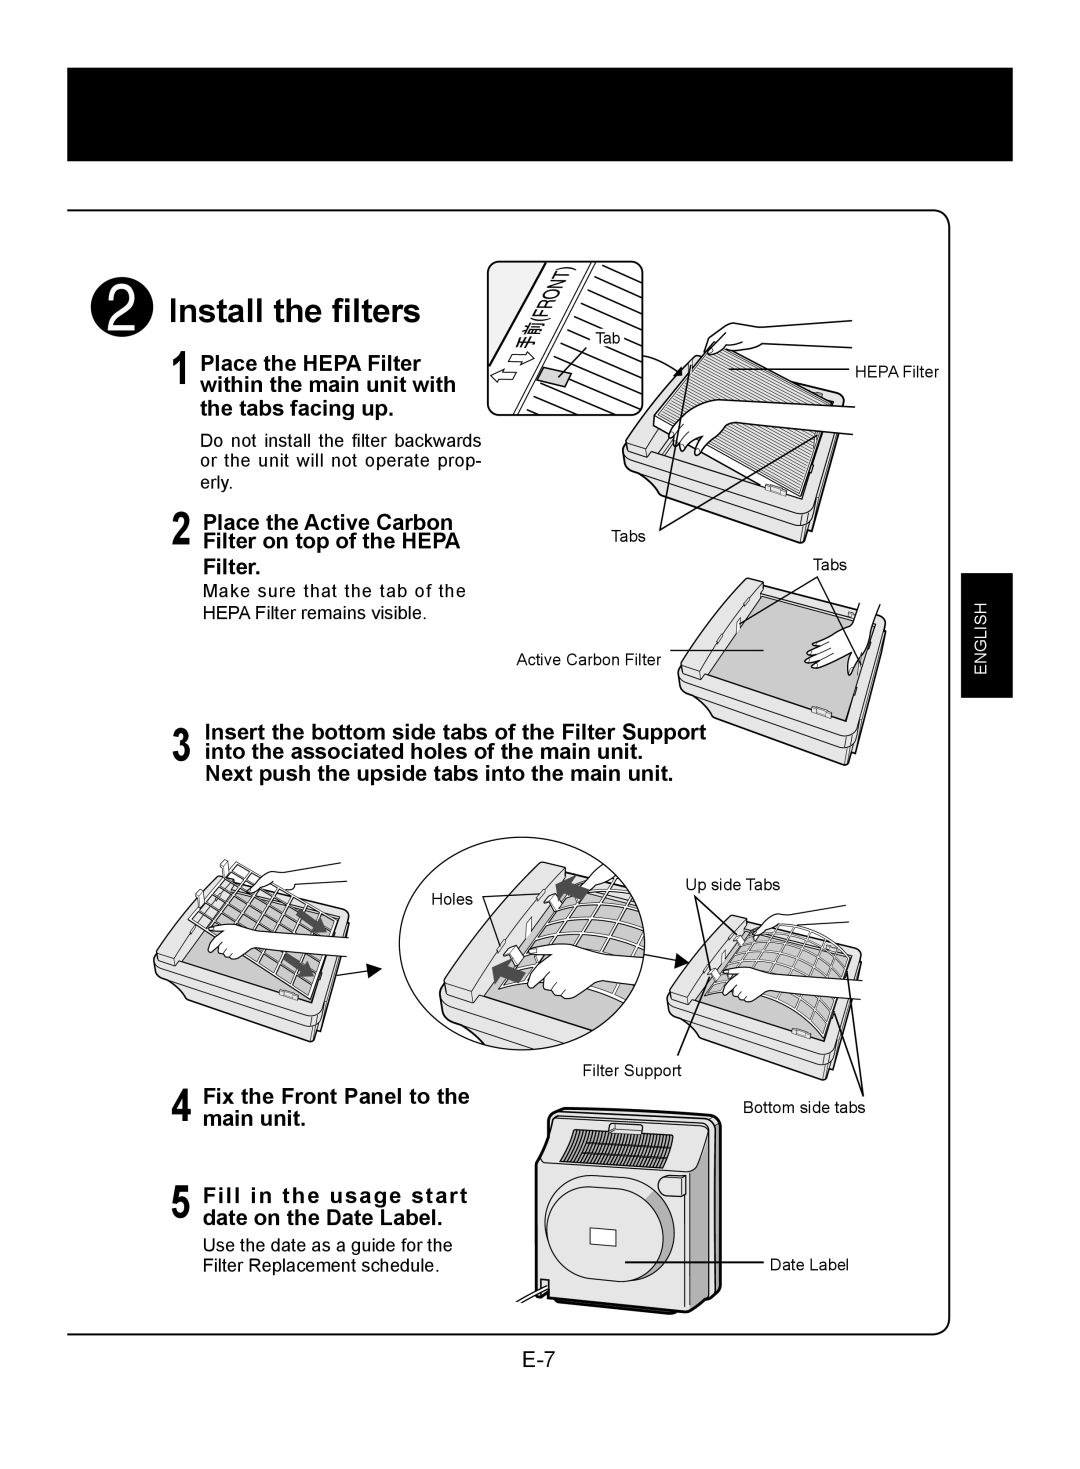 Sharp FU-W28E operation manual Install the filters, Place the Active Carbon, Filter on top of the HEPA Filter 